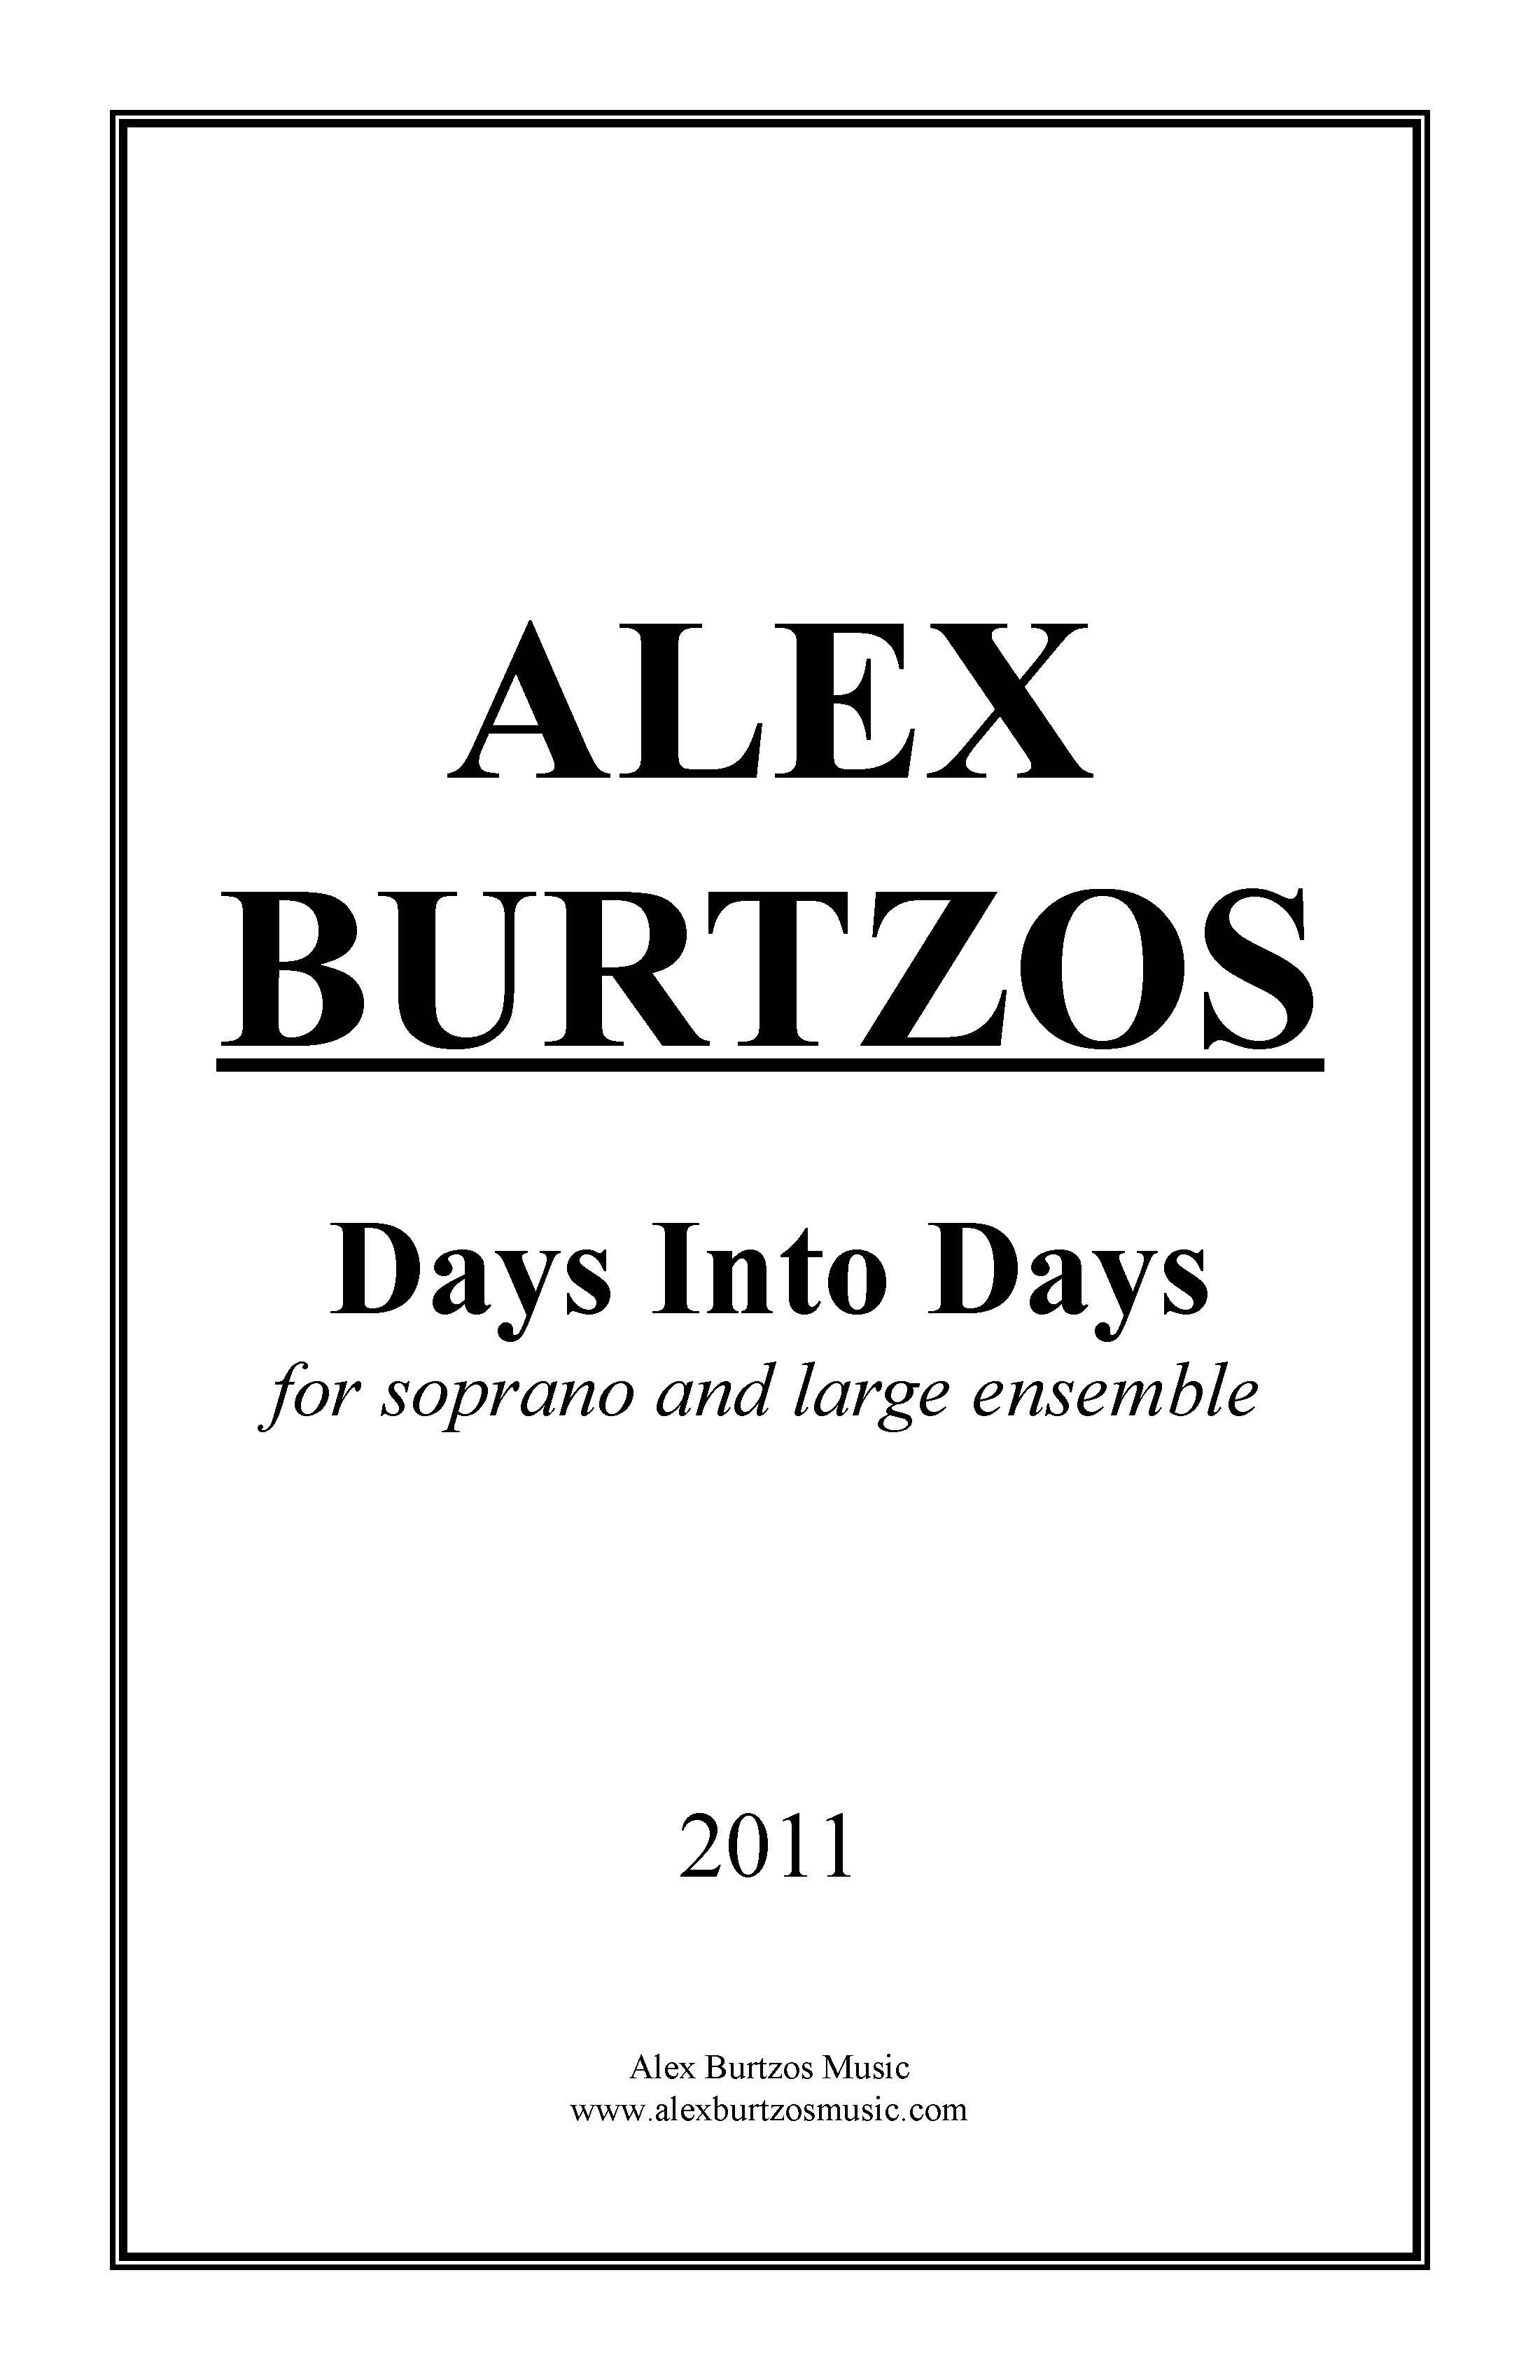 Days Into Days - Complete Score_Page_01.jpg